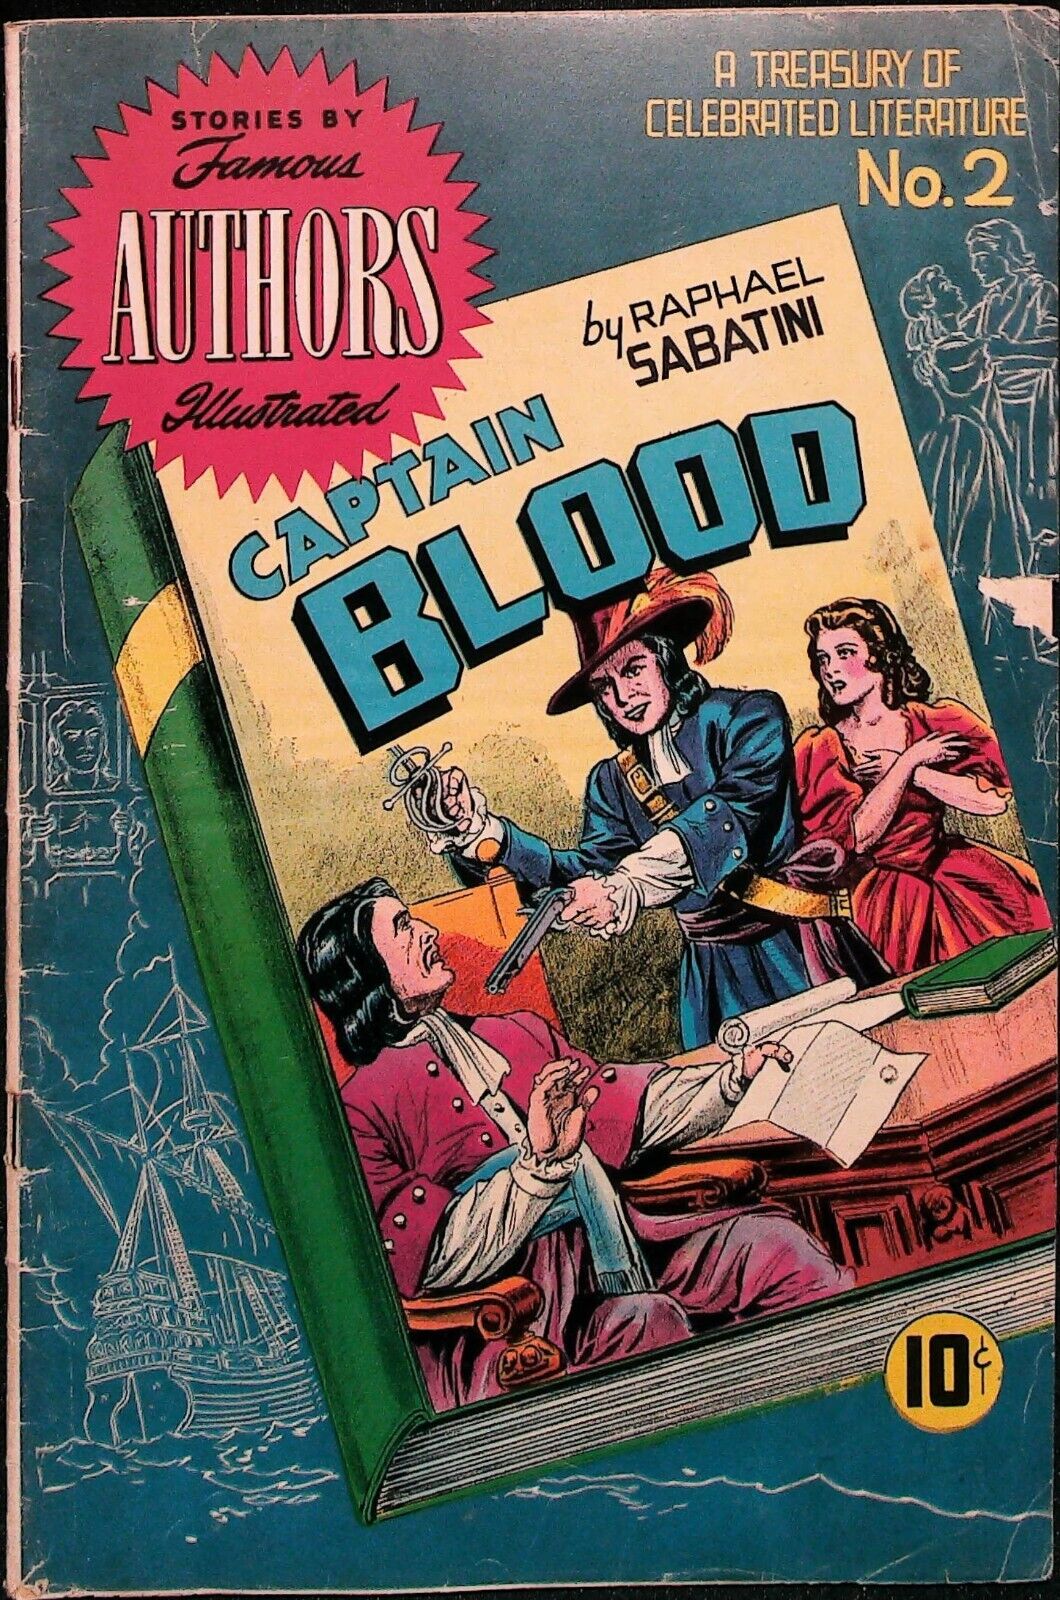 Stories By Famous Authors Ilustrated #2 (1950) *Captain Blood* - Good Range